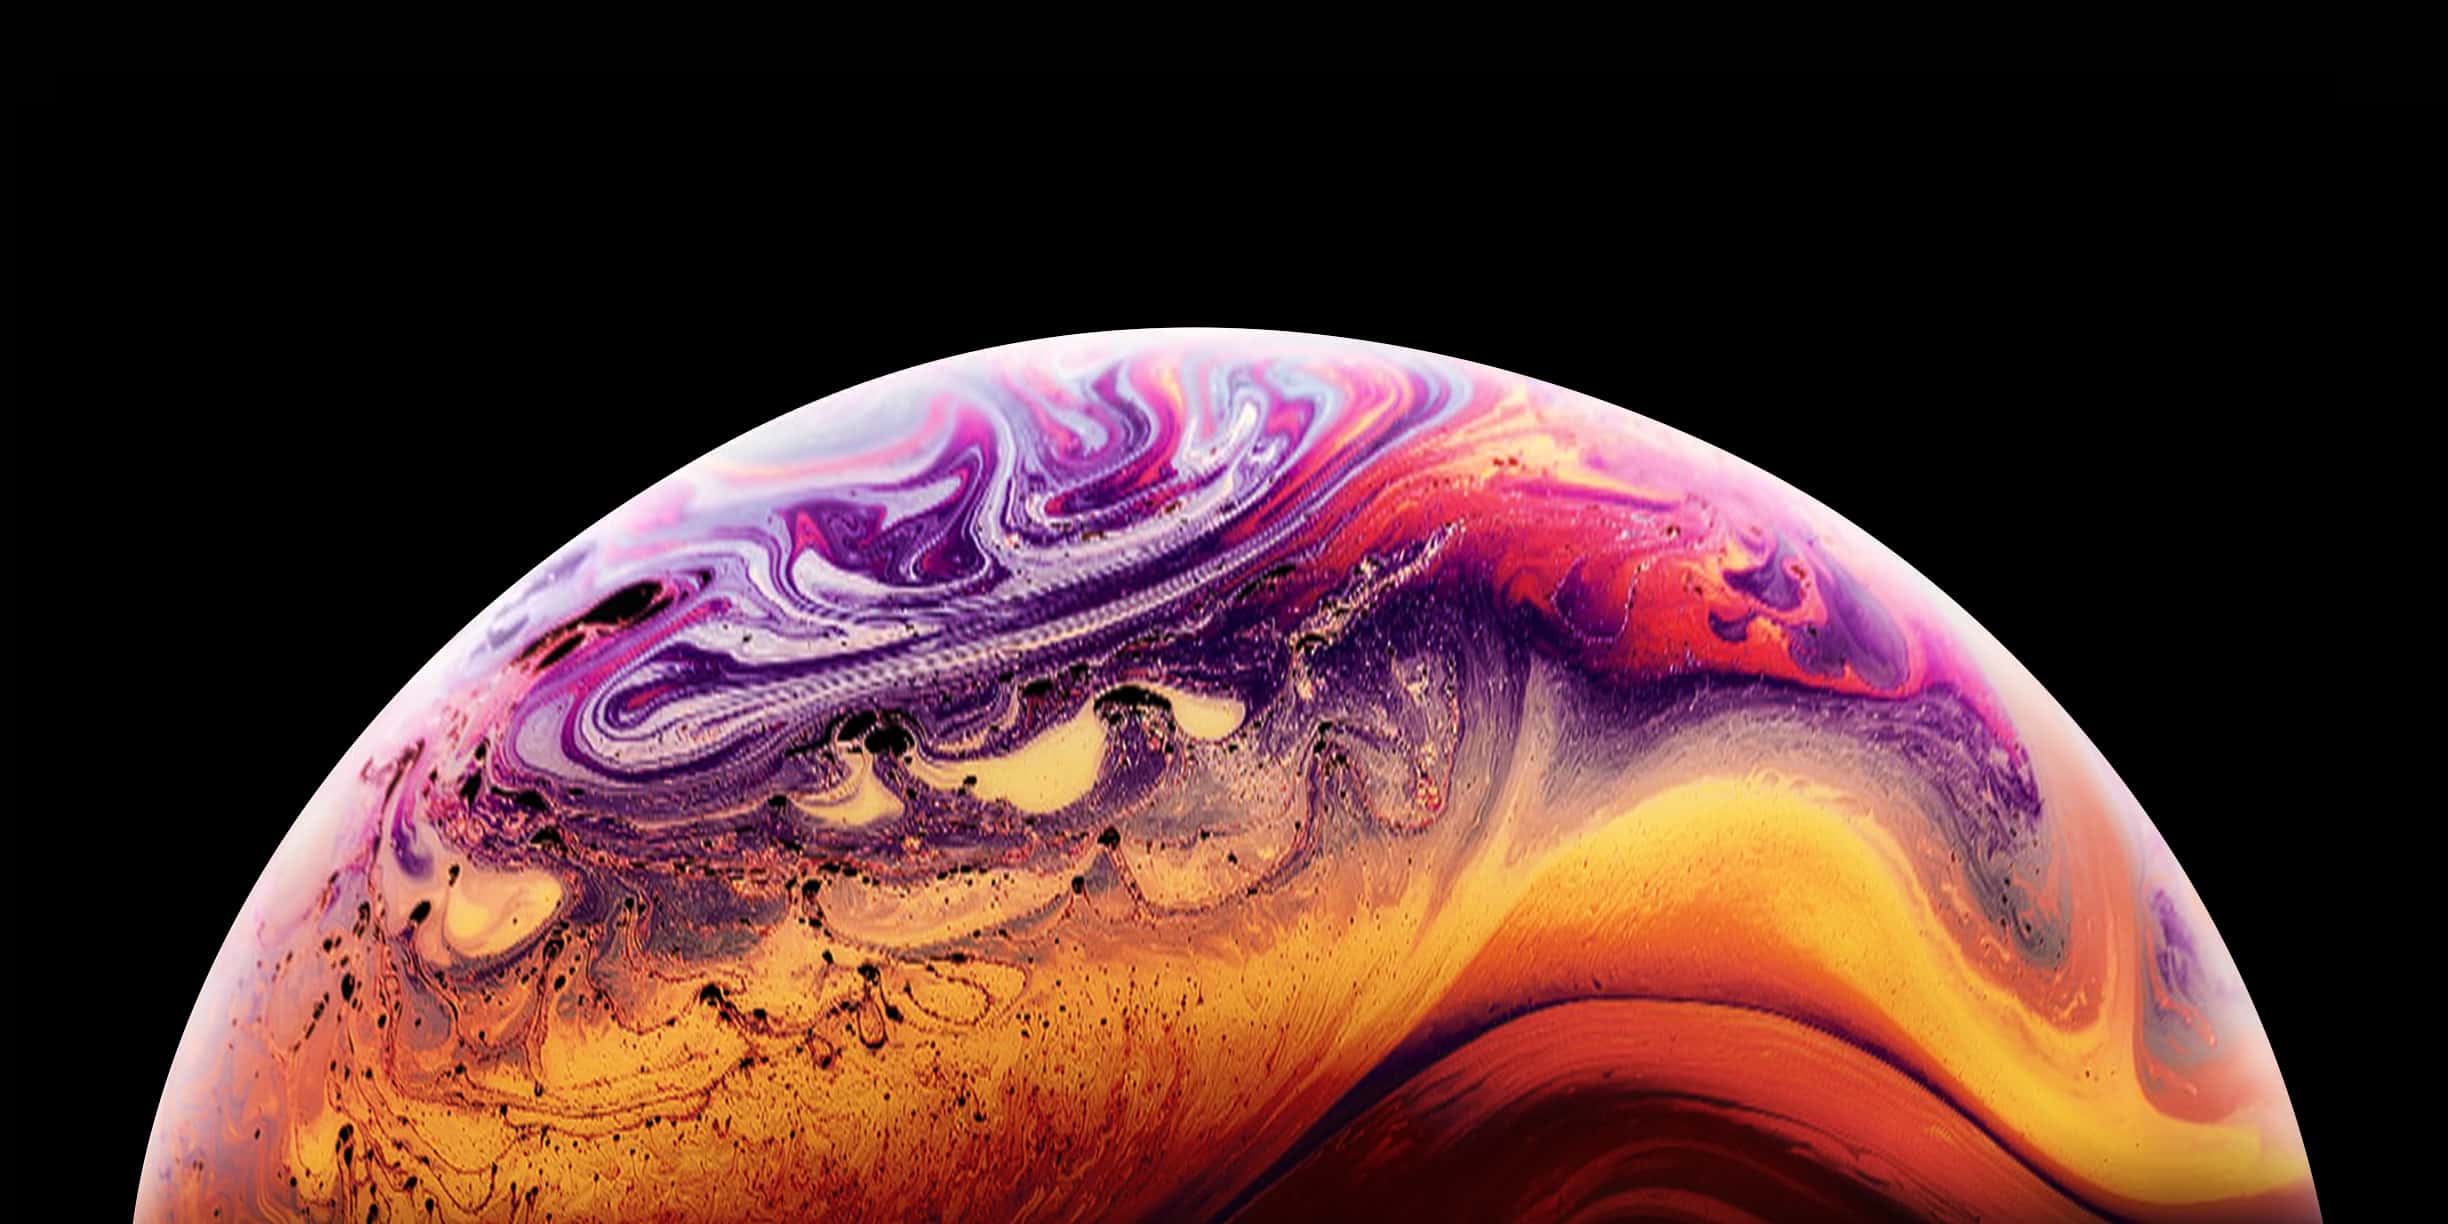 Grab the new iPhone XS wallpaper right here Cult of Mac